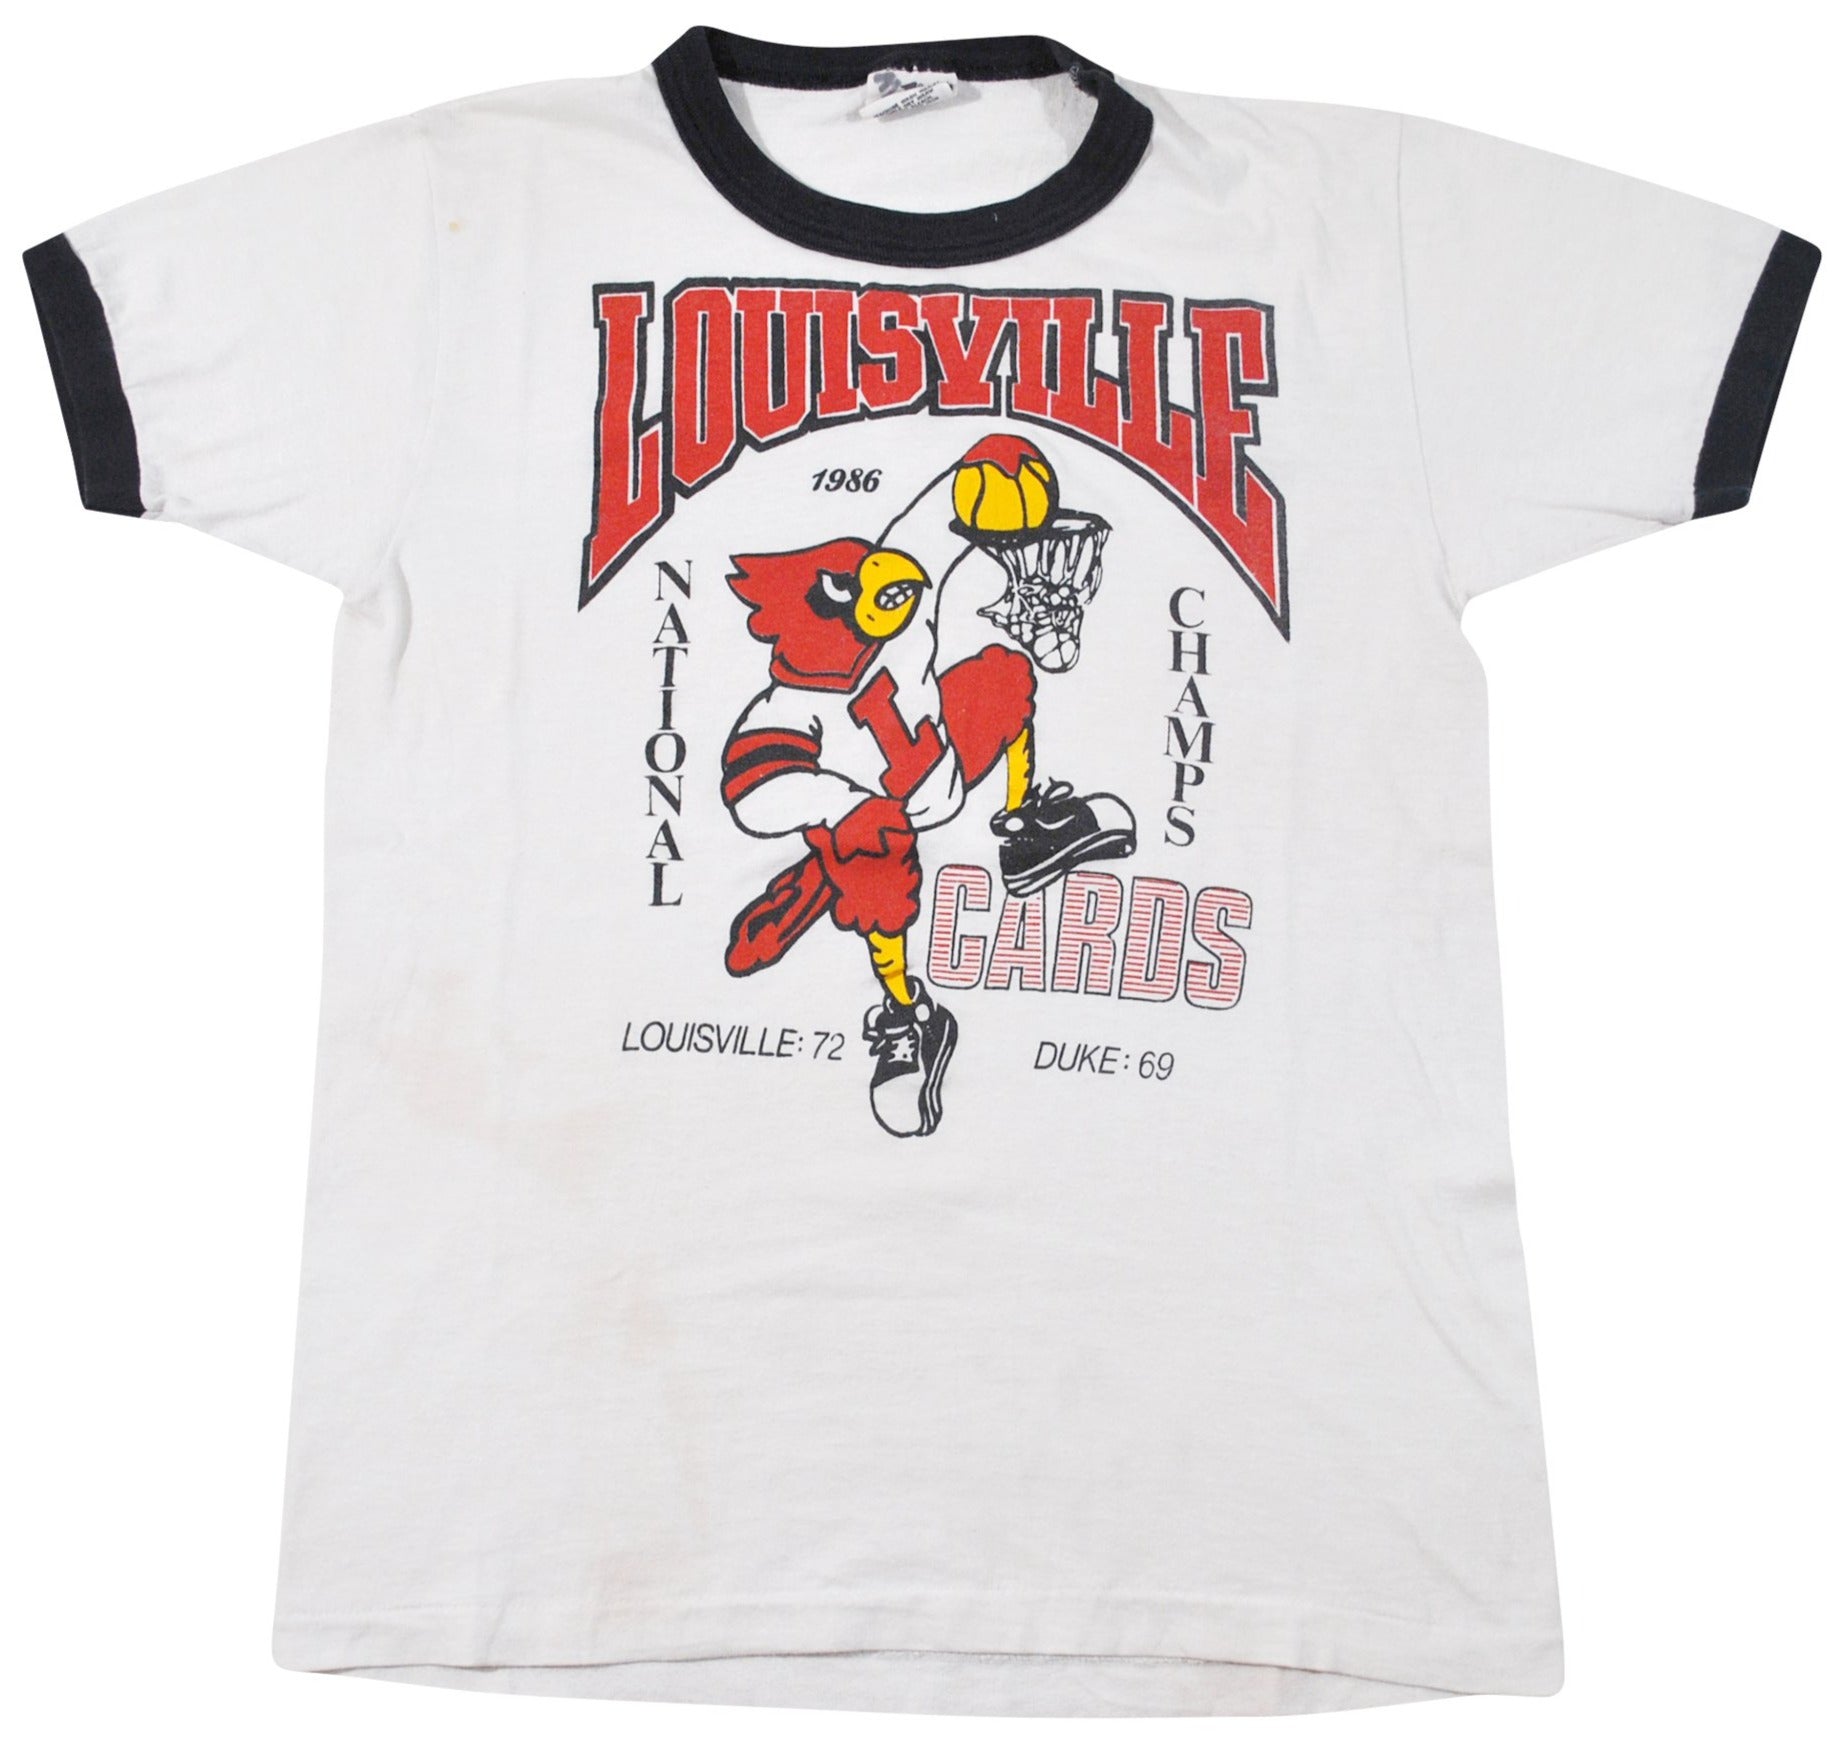 Vintage 1970's Louisville Cardinals T-Shirt Selected by Nomad Vintage